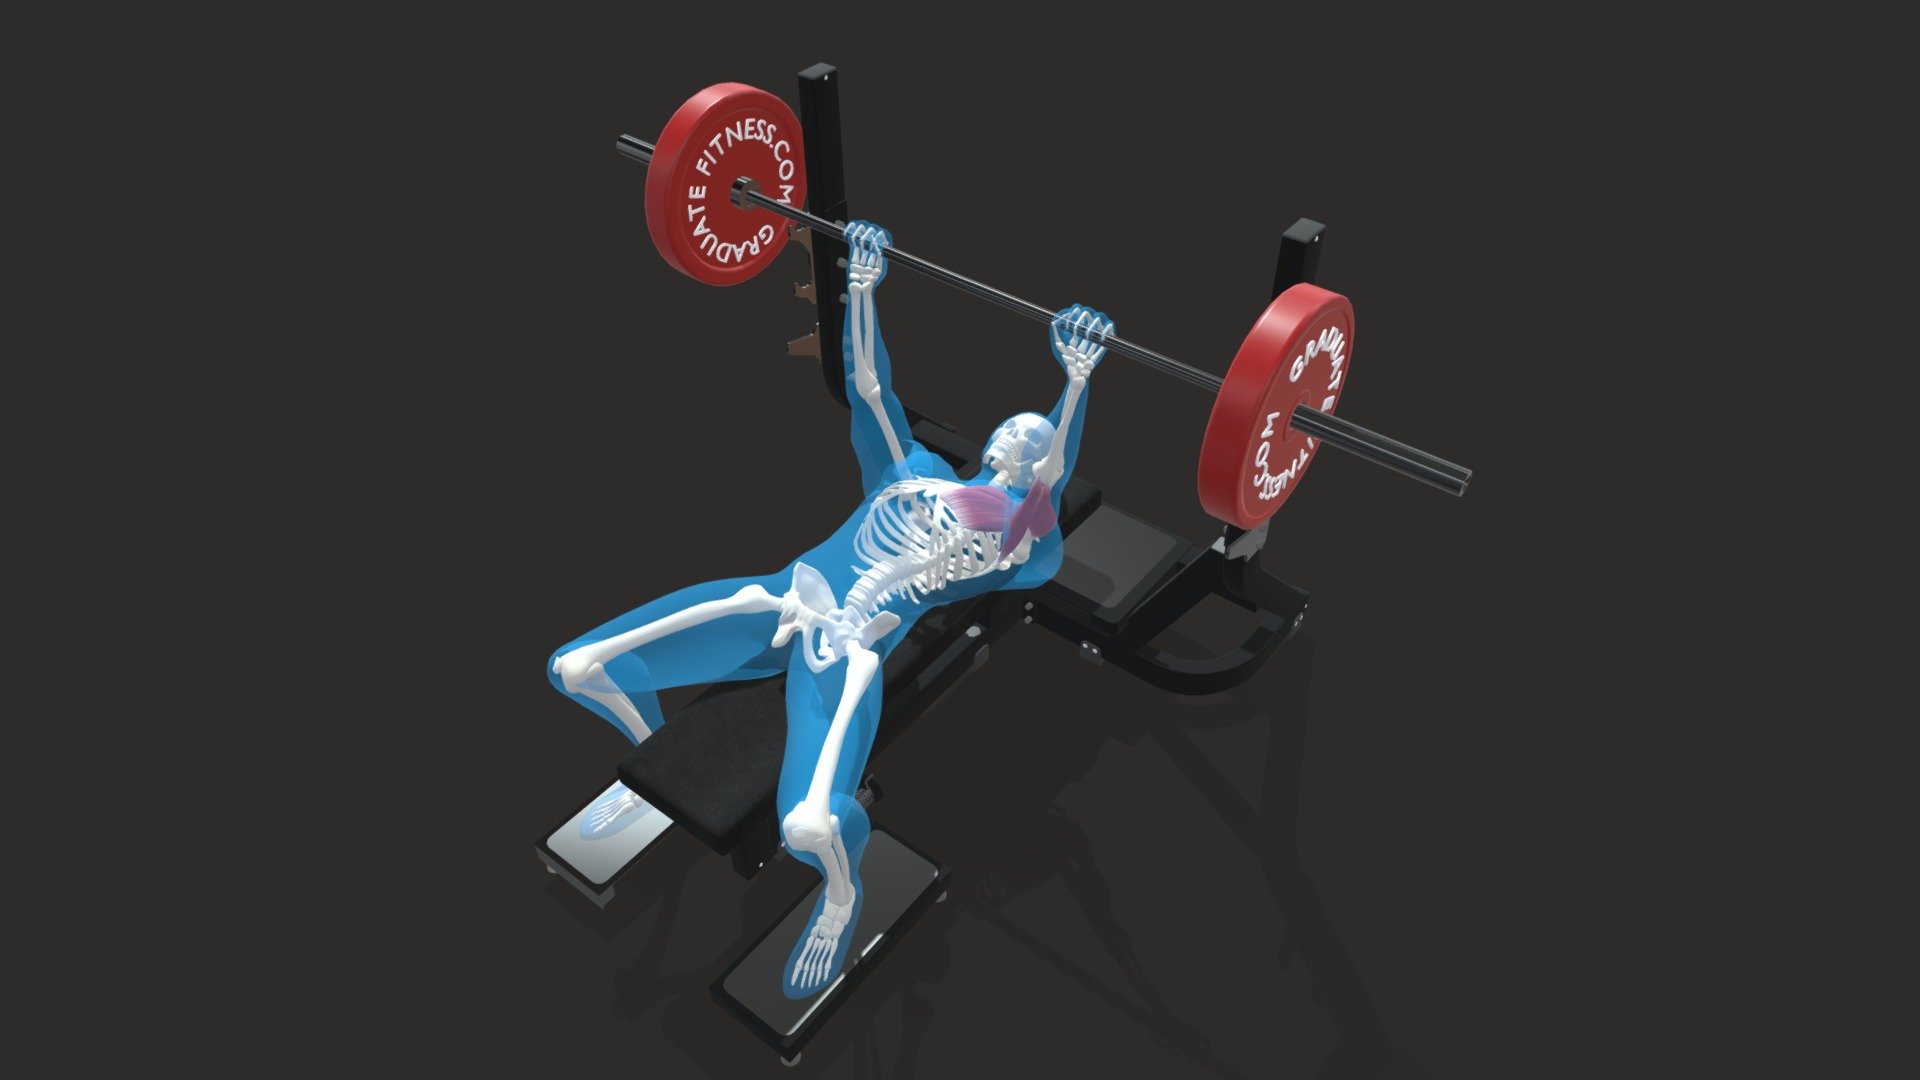 The Barbell Bench Press is perhaps the most notorious exercise performed on the gym floor. 

This compound chest movement is an essential training tool for building large strong pectoral muscles while also training the front delt and tricep muscles 3d model